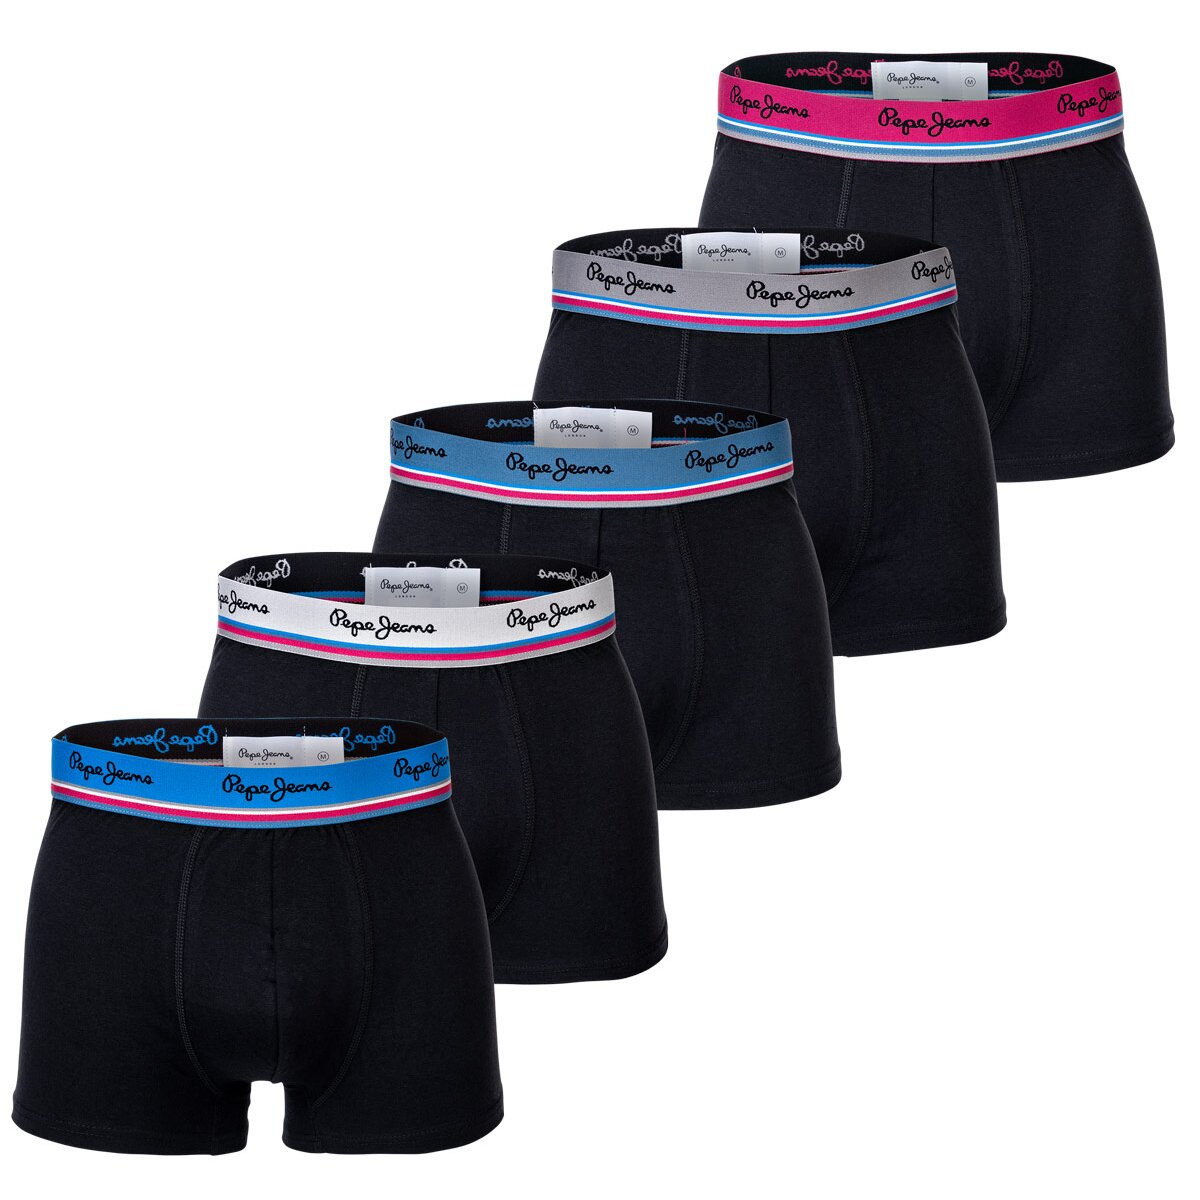 Pepe Jeans Men's Boxer Shorts, 5 Pack - TEO, 52,95 €